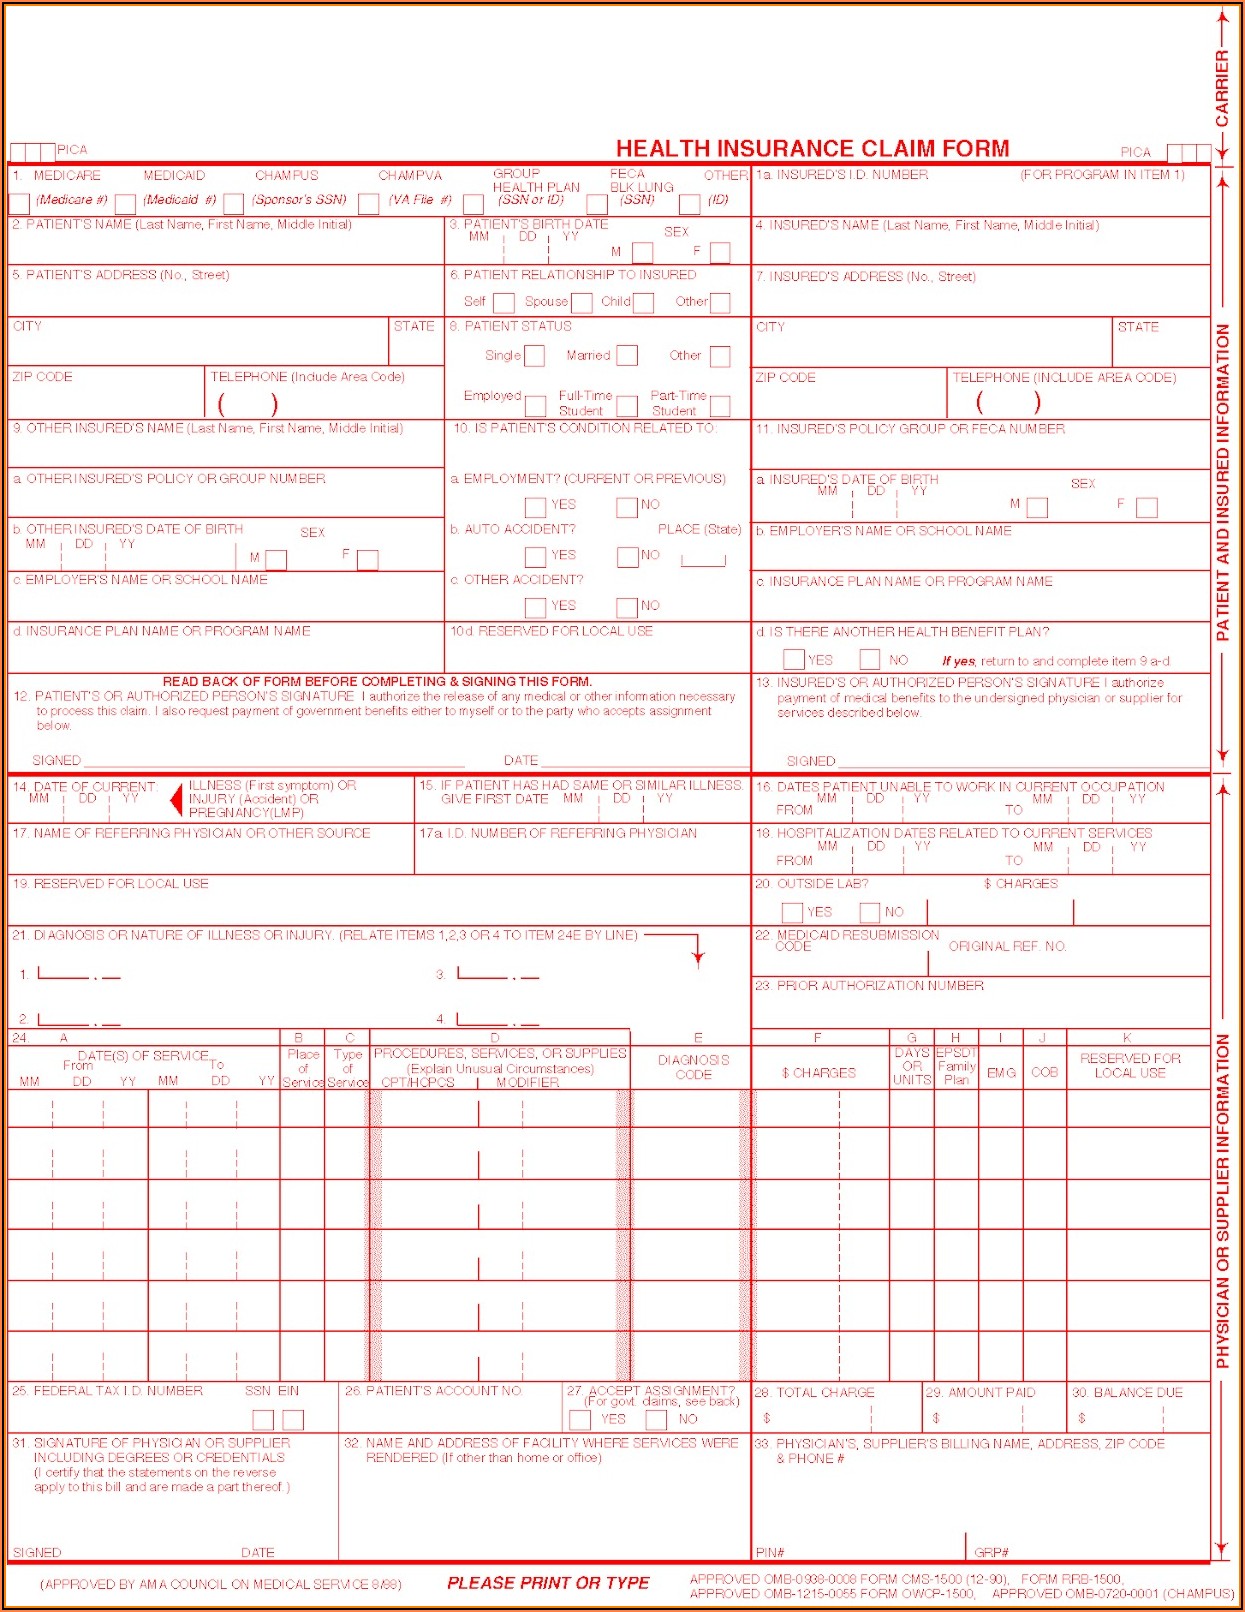 Cms 1500 Claim Form Fillable Download Free